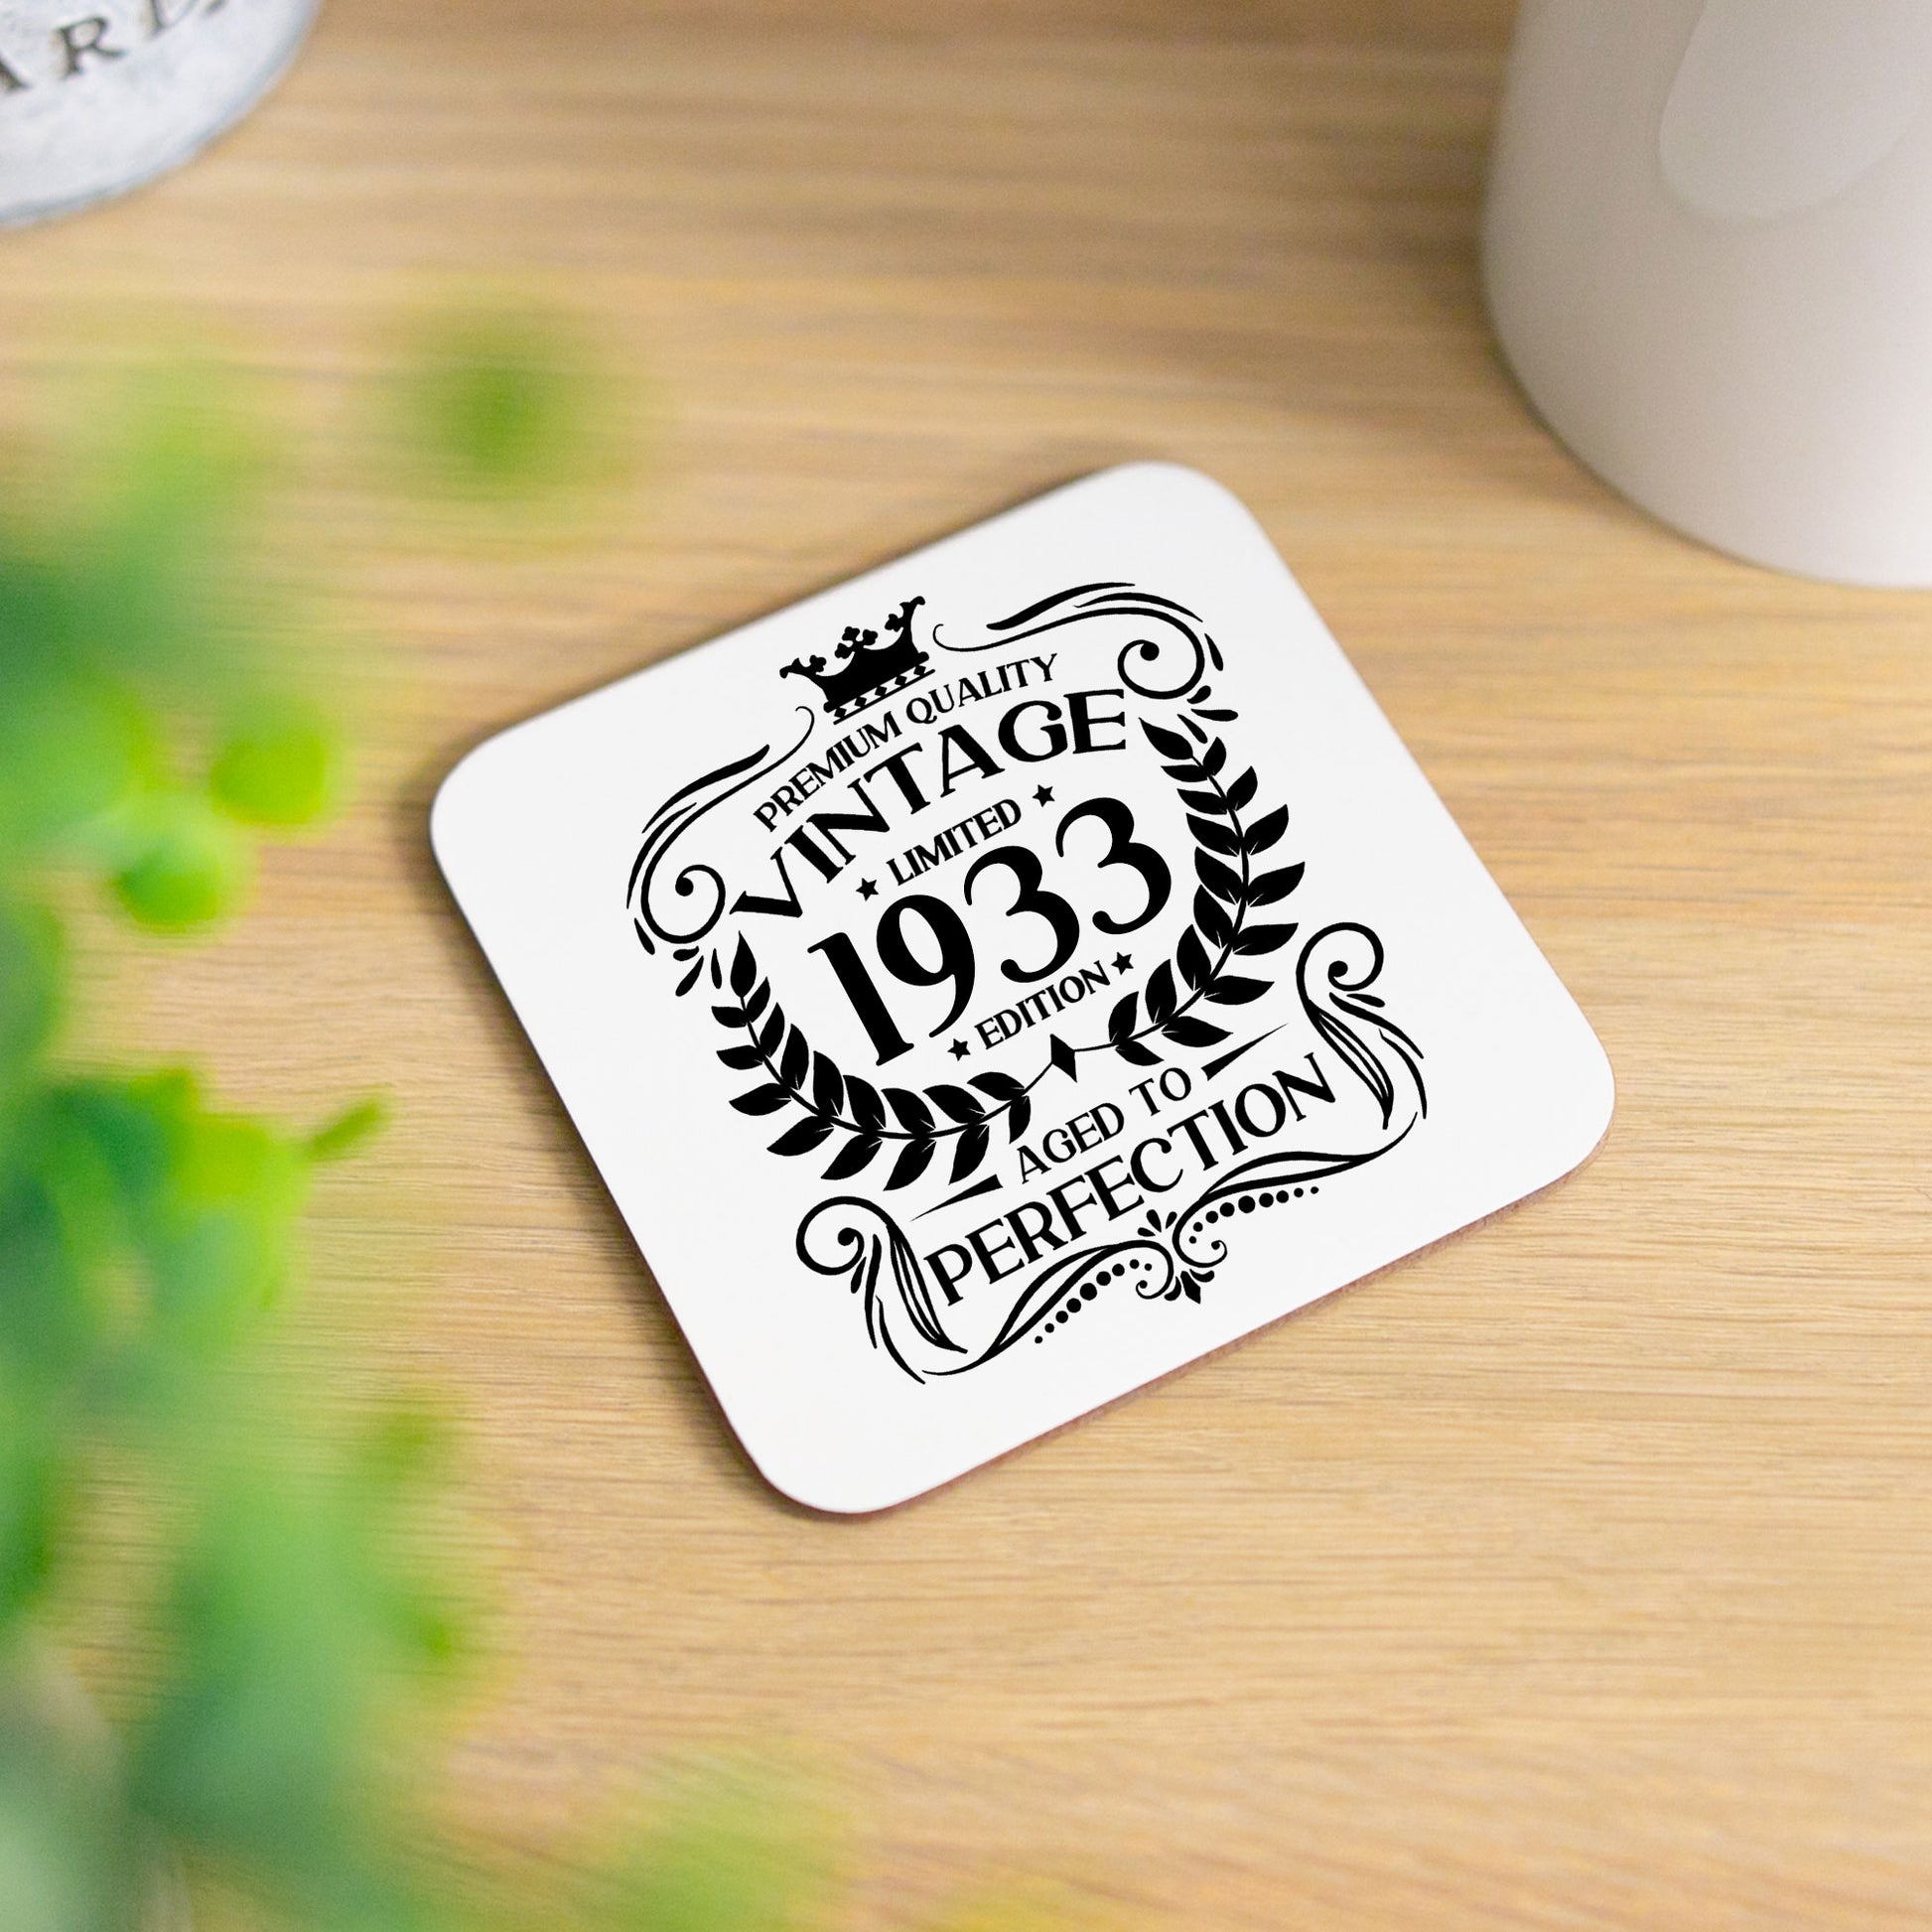 Vintage 1933 90th Birthday Engraved Whiskey Glass Gift  - Always Looking Good - Glass & Printed Coaster  